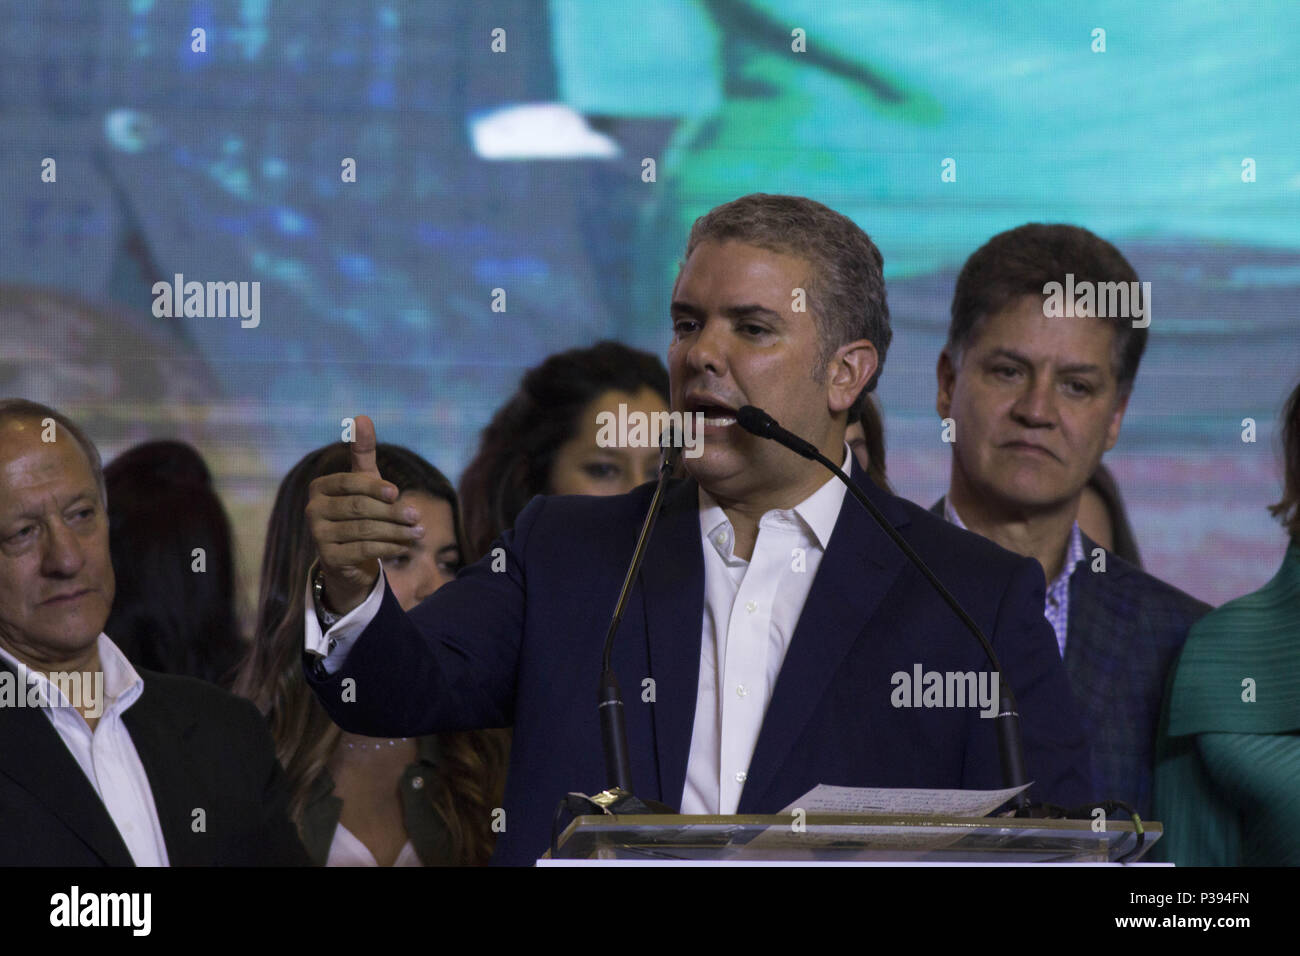 June 17, 2018 - The new president Ivan Duque speaks after being elected as the new president of Colombia in the second round of the 2018 presidential elections Credit: Daniel AndrÃƒ Credit: S GarzÃƒÂ³N Heraz/ZUMA Wire/Alamy Live News Stock Photo